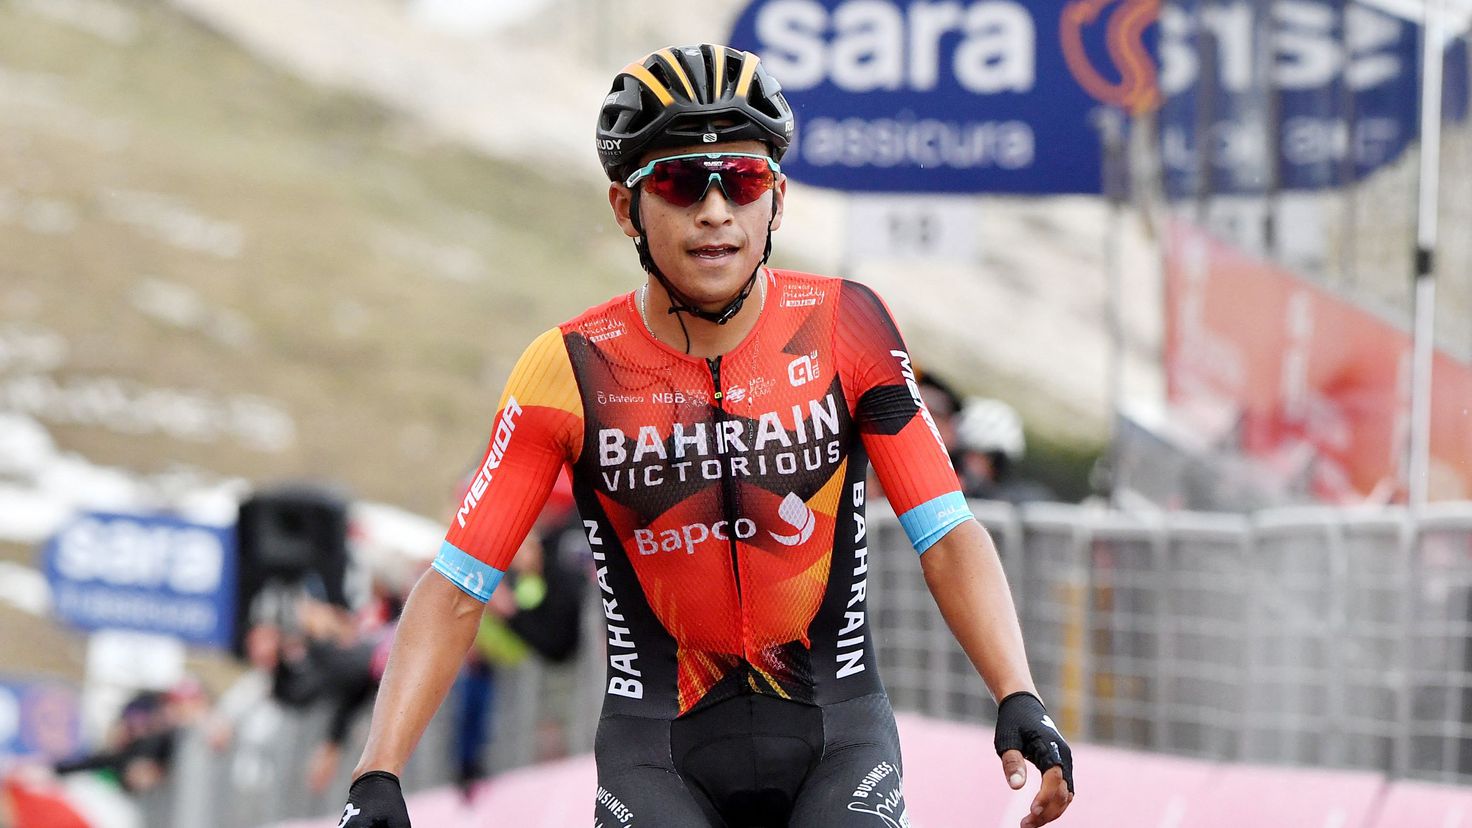 Buitrago achieves victory 34 for Colombia in Giro d'Italia
